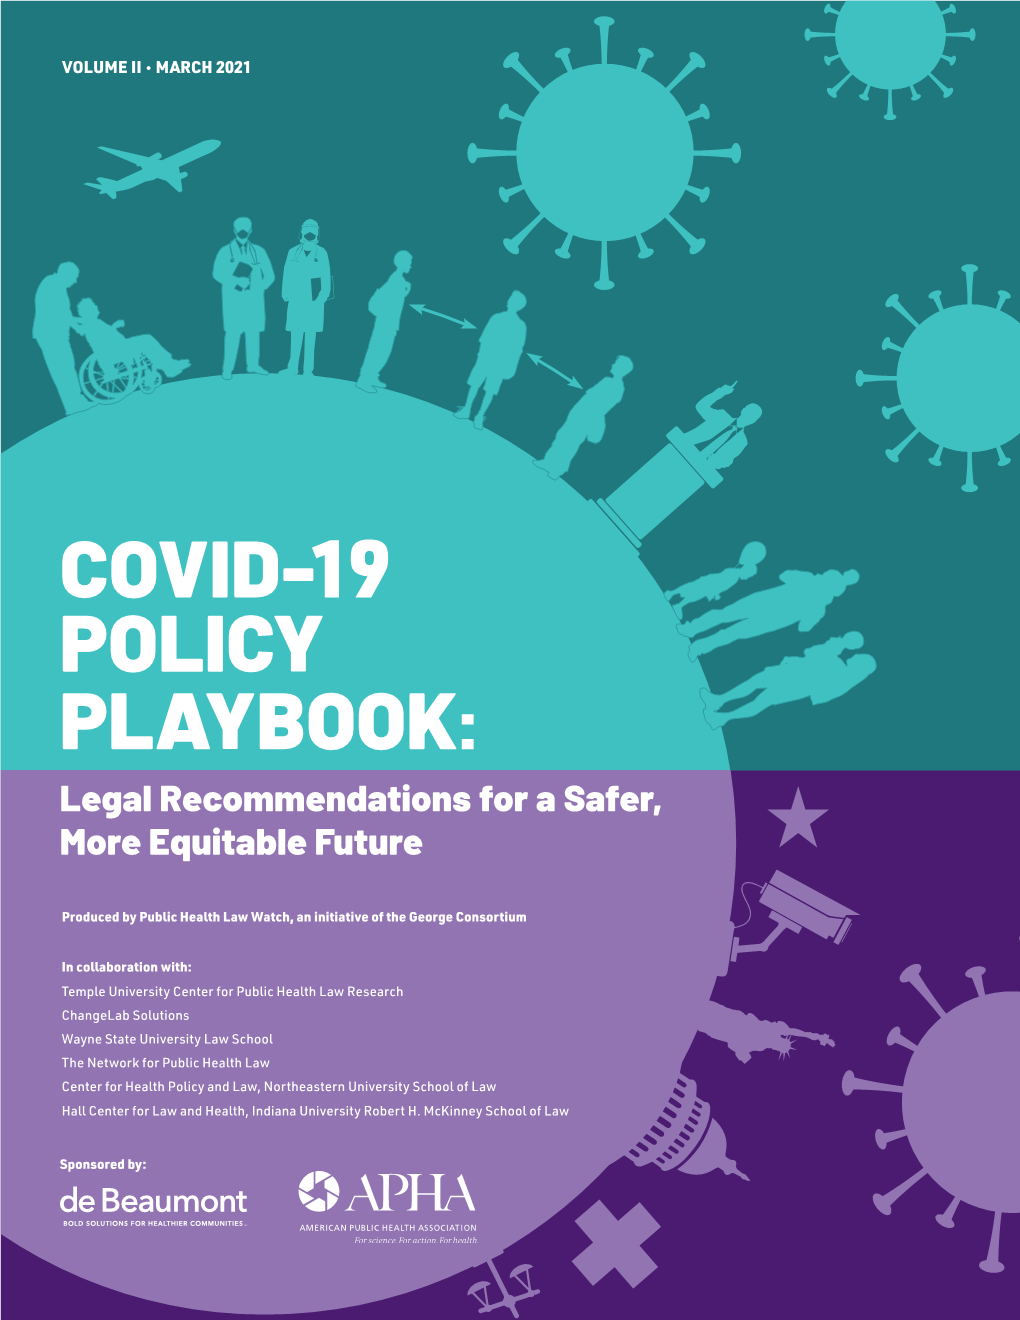 COVID-19 POLICY PLAYBOOK: Legal Recommendations for a Safer, More Equitable Future